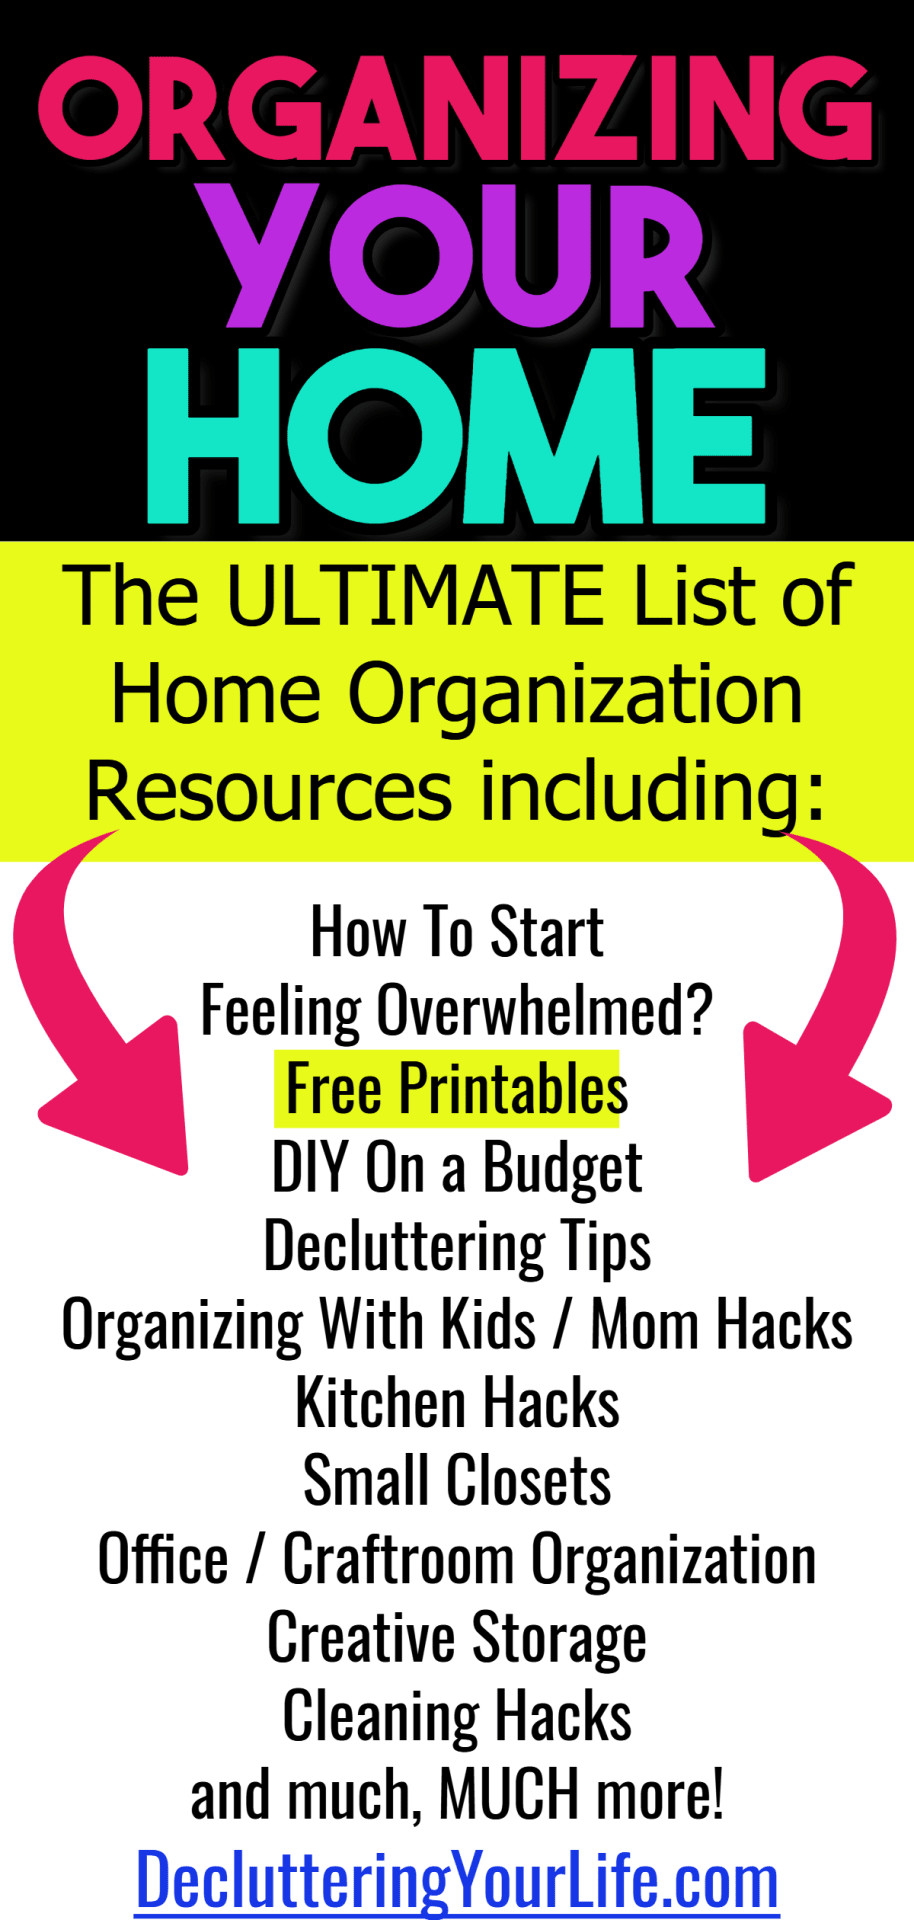 Organizing your home - the ultimate list of home organization tips including: How To Start, Feeling Overwhelmed, Free Printables, DIY On a Budget, Decluttering Tips, Organizing With Kids / Mom Hacks, Kitchen Hacks, Small Closets, Office / Craftroom Organization, Creative Storage, Cleaning Hacks, Paper Clutter Solutions and more to take YOU from cluttered mess to organized success!